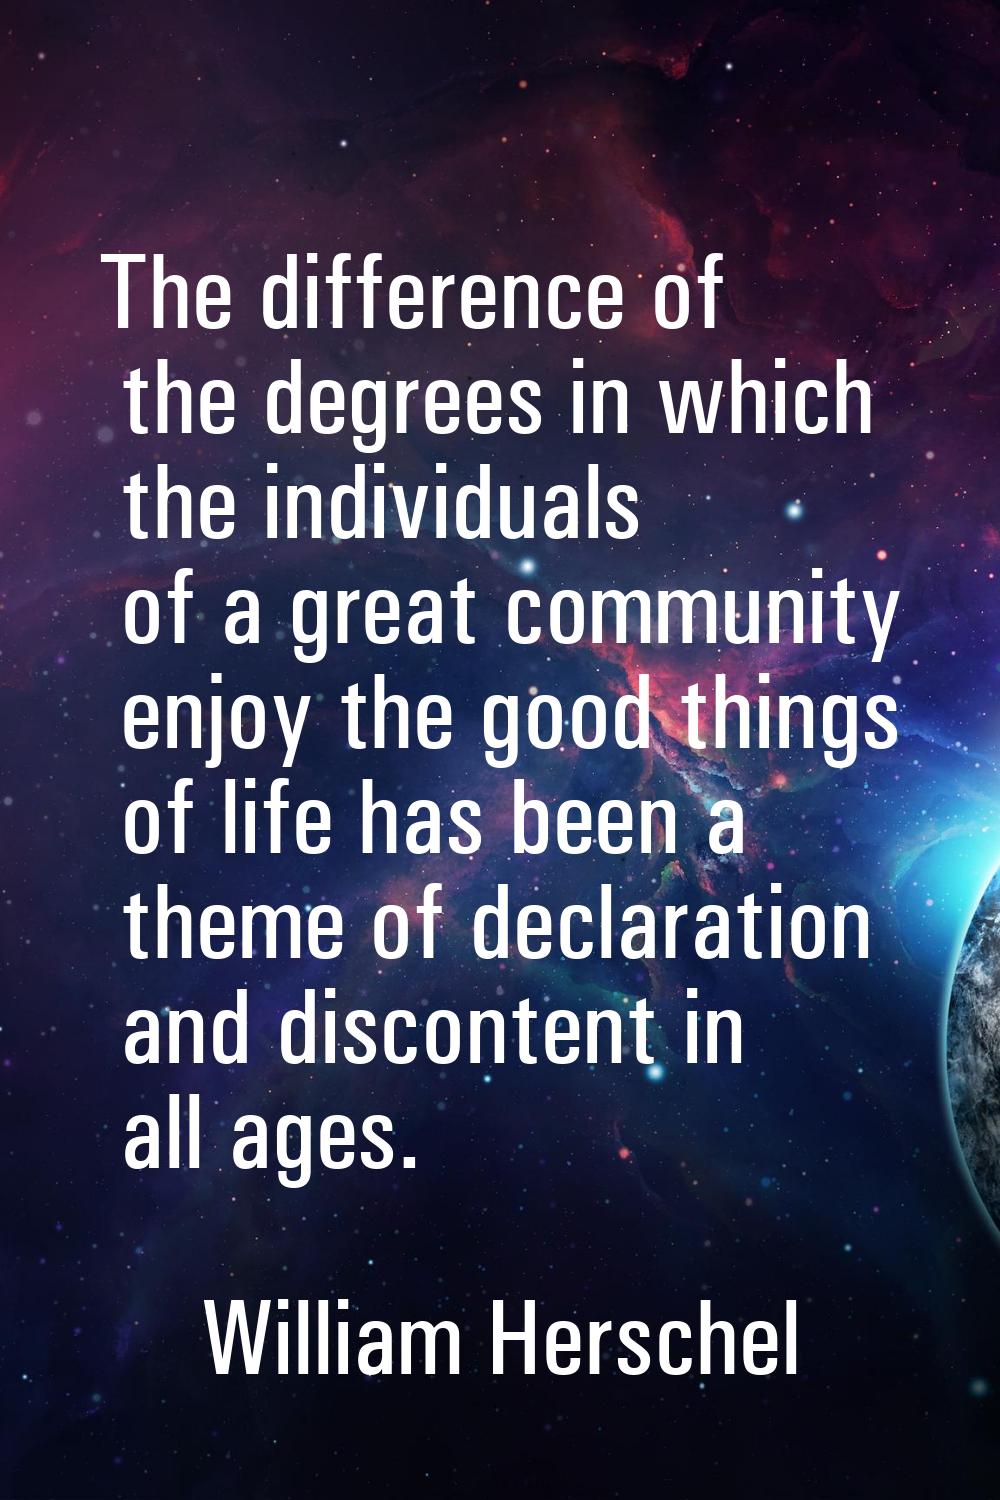 The difference of the degrees in which the individuals of a great community enjoy the good things o